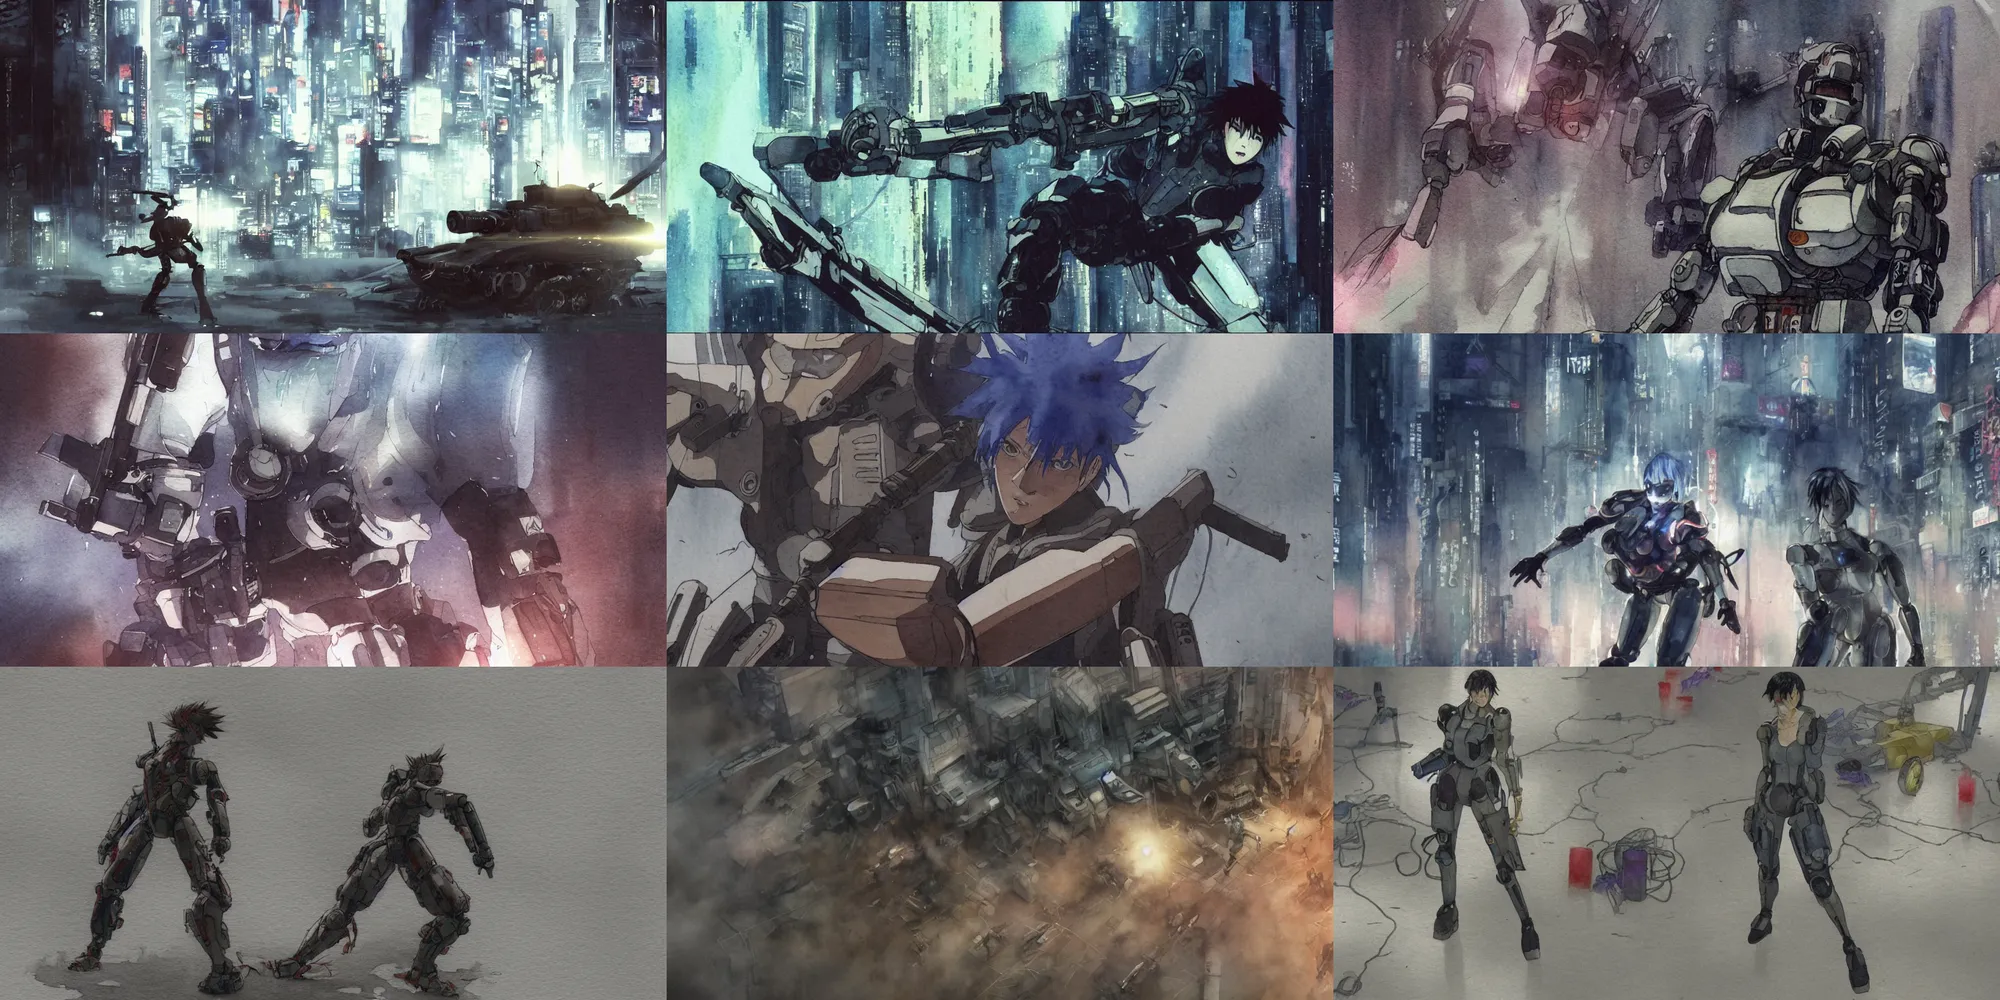 Prompt: incredible screenshot, simple watercolor, masamune shirow ghost in the shell movie scene close up broken Kusanagi tank battle, brown mud, dust, titanic tank with legs, robot arm, ripped to shreds, wide eyes shocked expression, karate kick , laser wip, lightning rollerblades up a skyscraper, light rain, shinjuku, reflections, refraction, bounce light, rim light, bokeh ,hd, 4k, remaster, dynamic camera angle, deep 3 point perspective, fish eye, dynamic scene